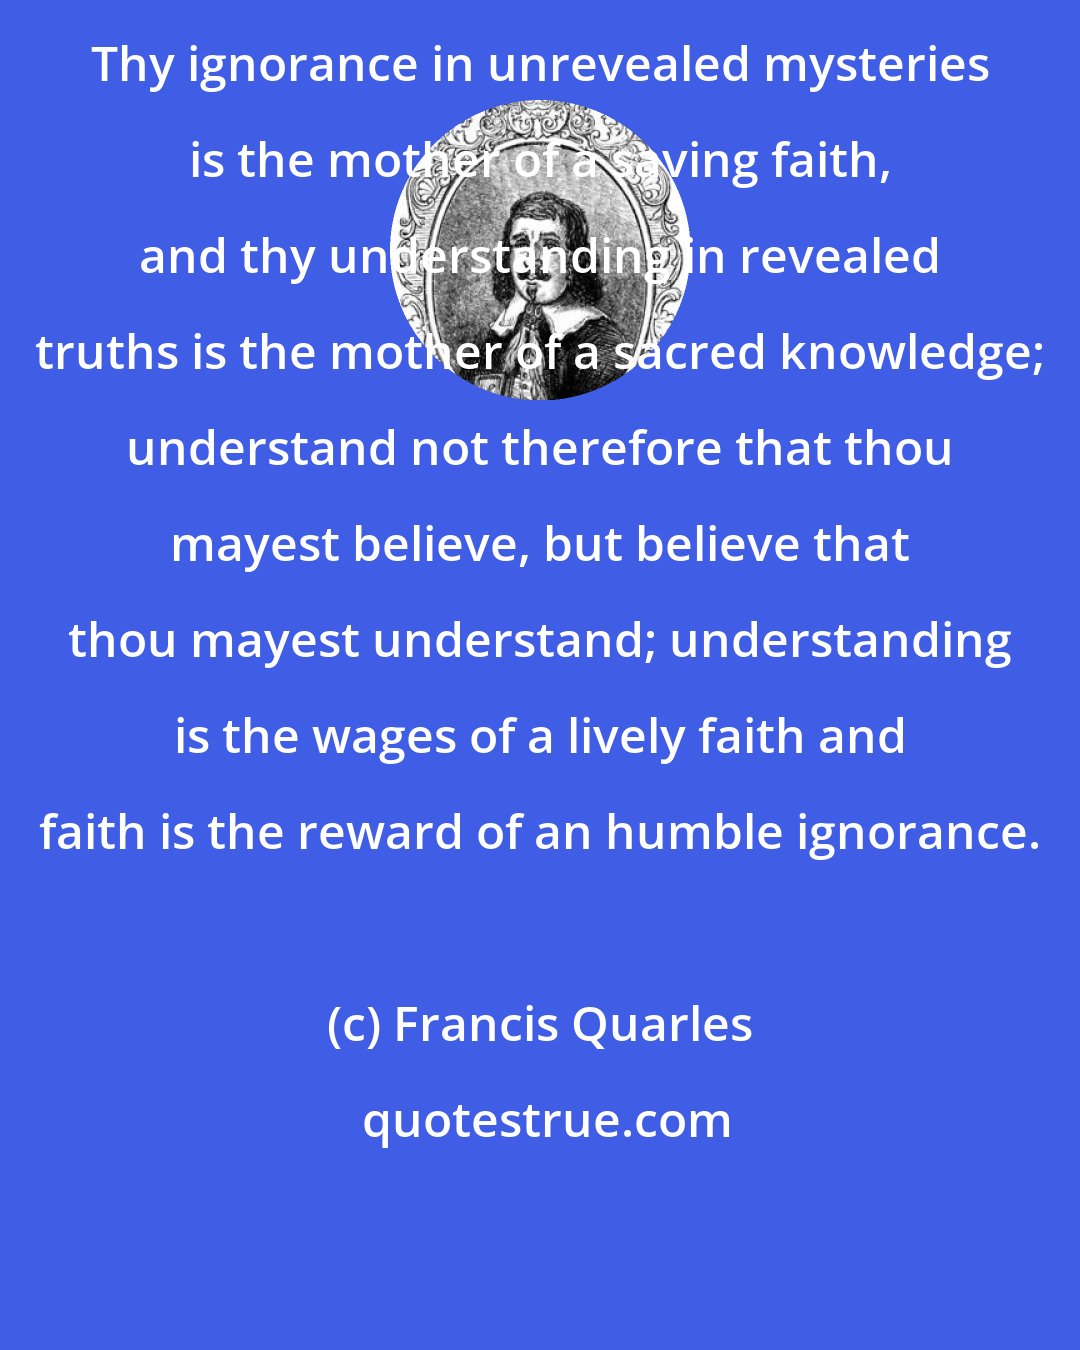 Francis Quarles: Thy ignorance in unrevealed mysteries is the mother of a saving faith, and thy understanding in revealed truths is the mother of a sacred knowledge; understand not therefore that thou mayest believe, but believe that thou mayest understand; understanding is the wages of a lively faith and faith is the reward of an humble ignorance.